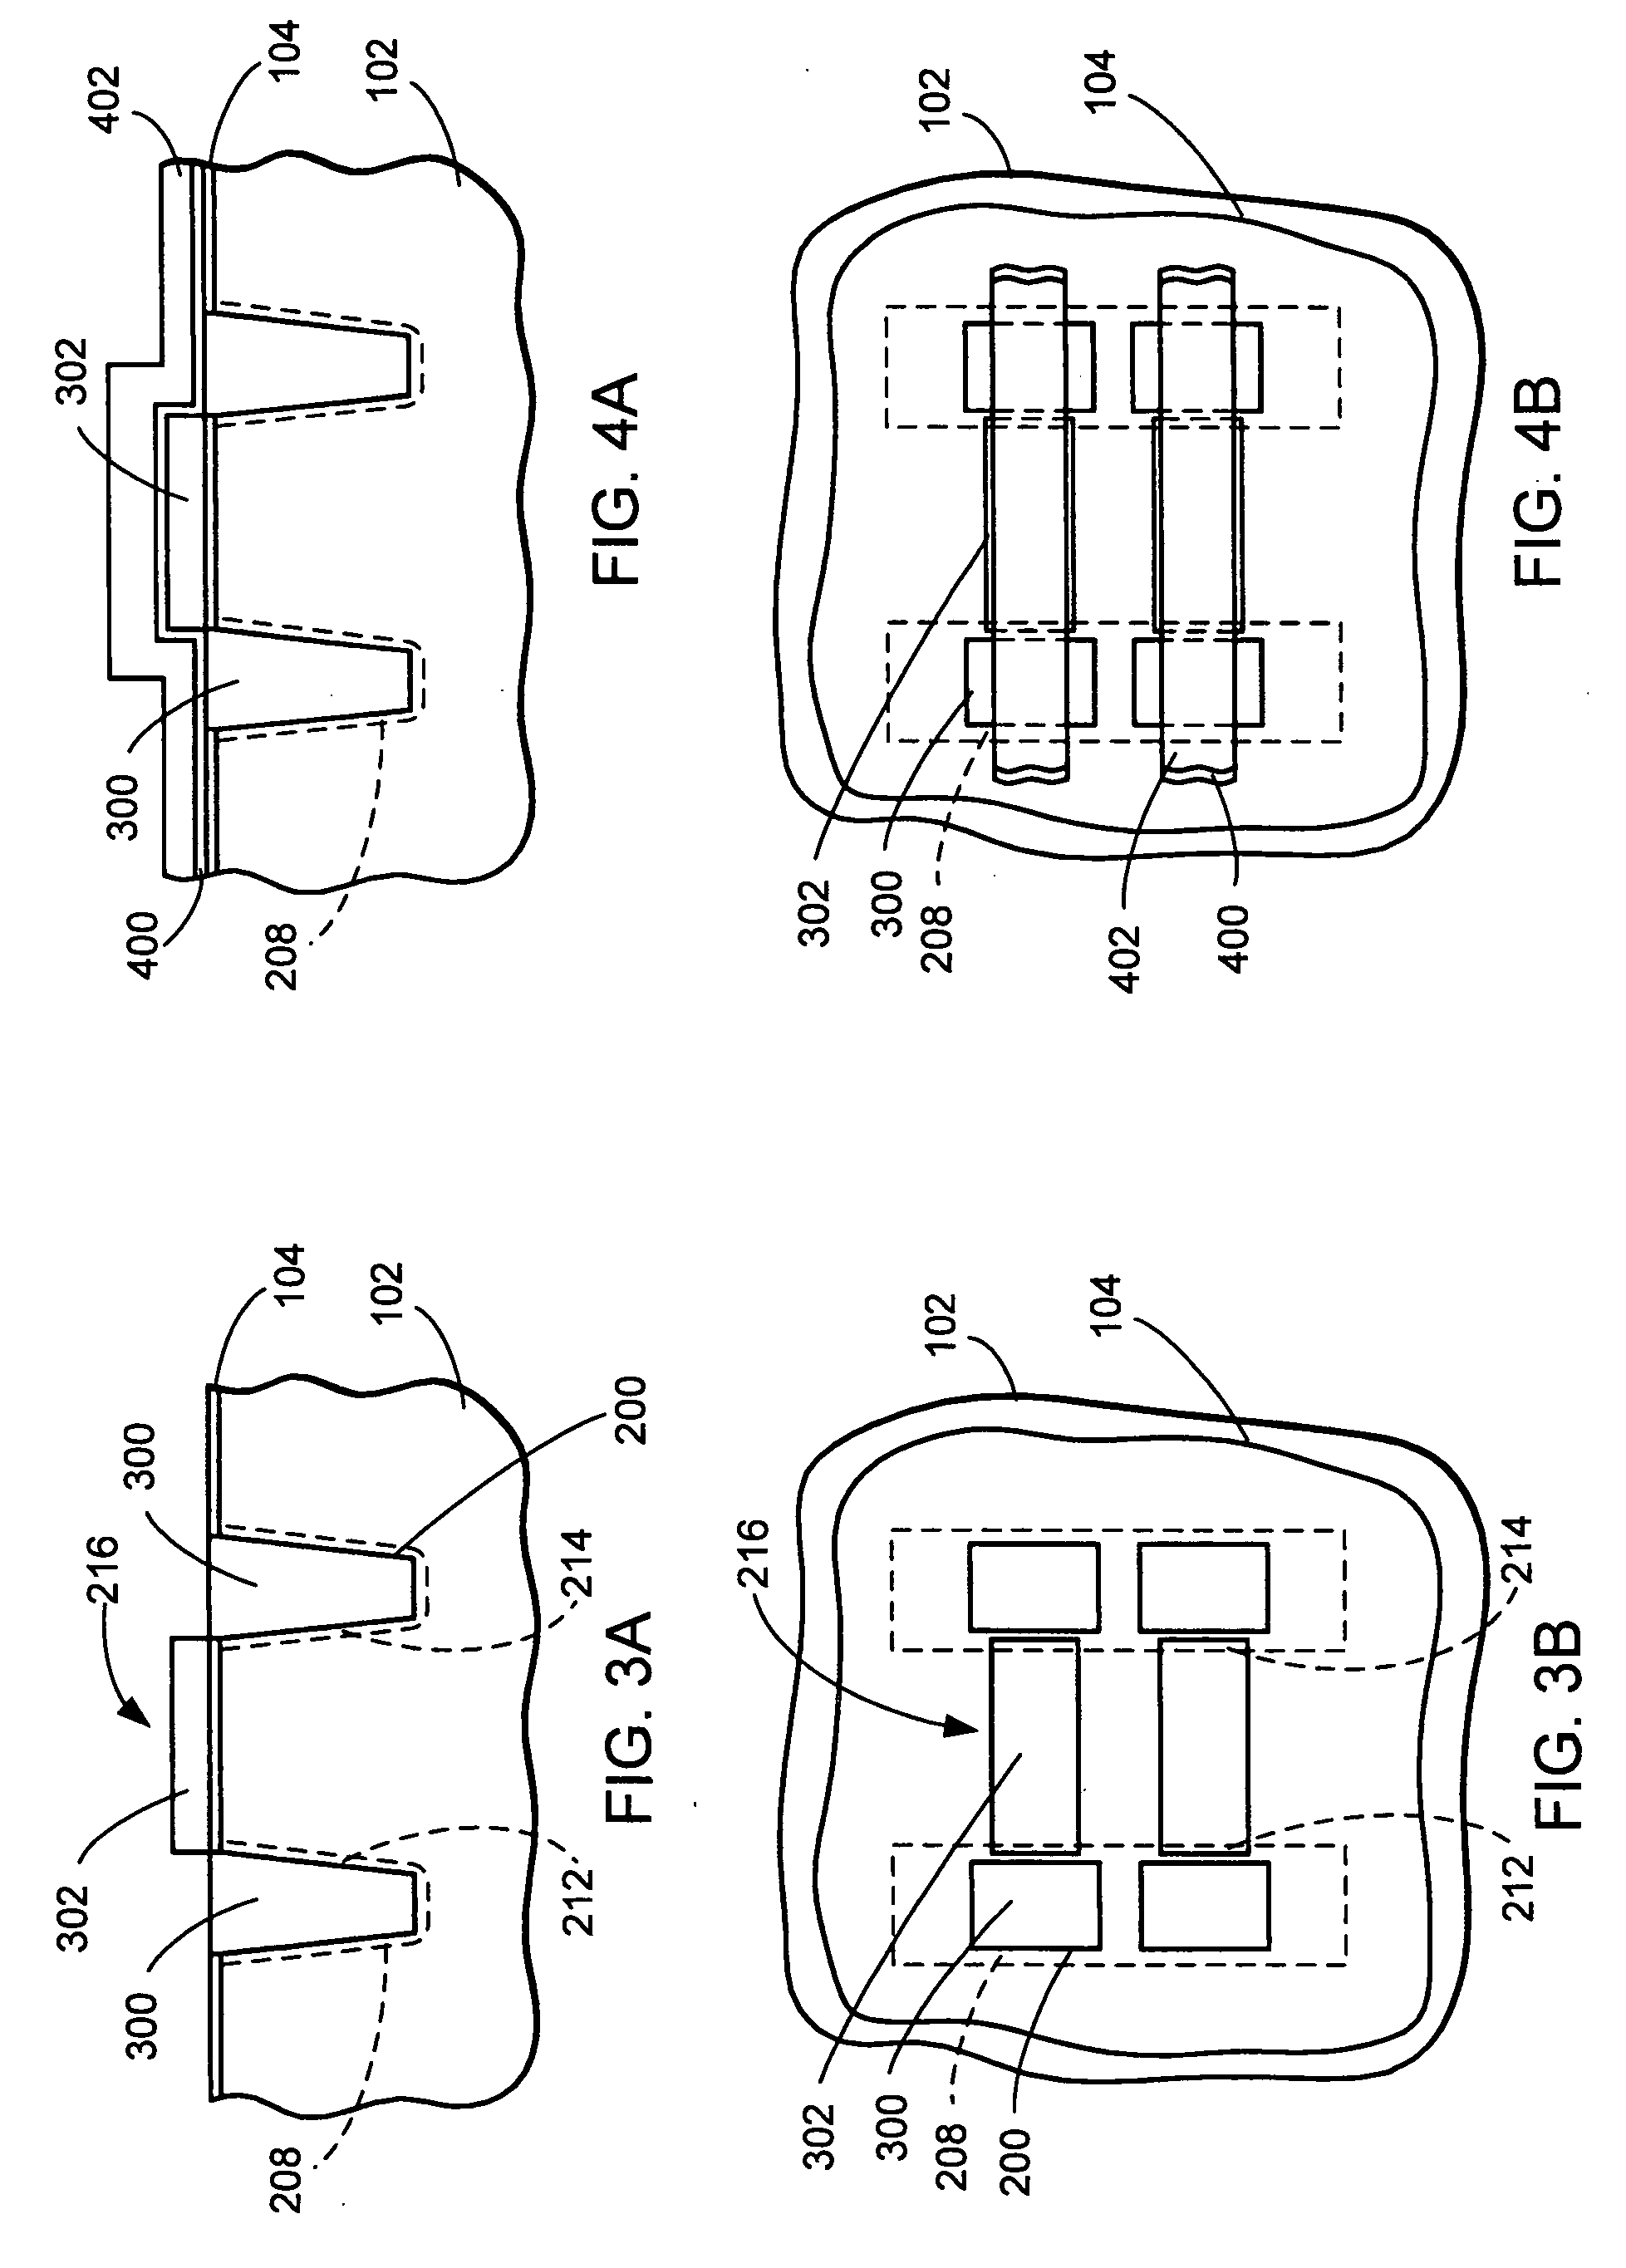 Non-volatile memory and manufacturing method using STI trench implantation